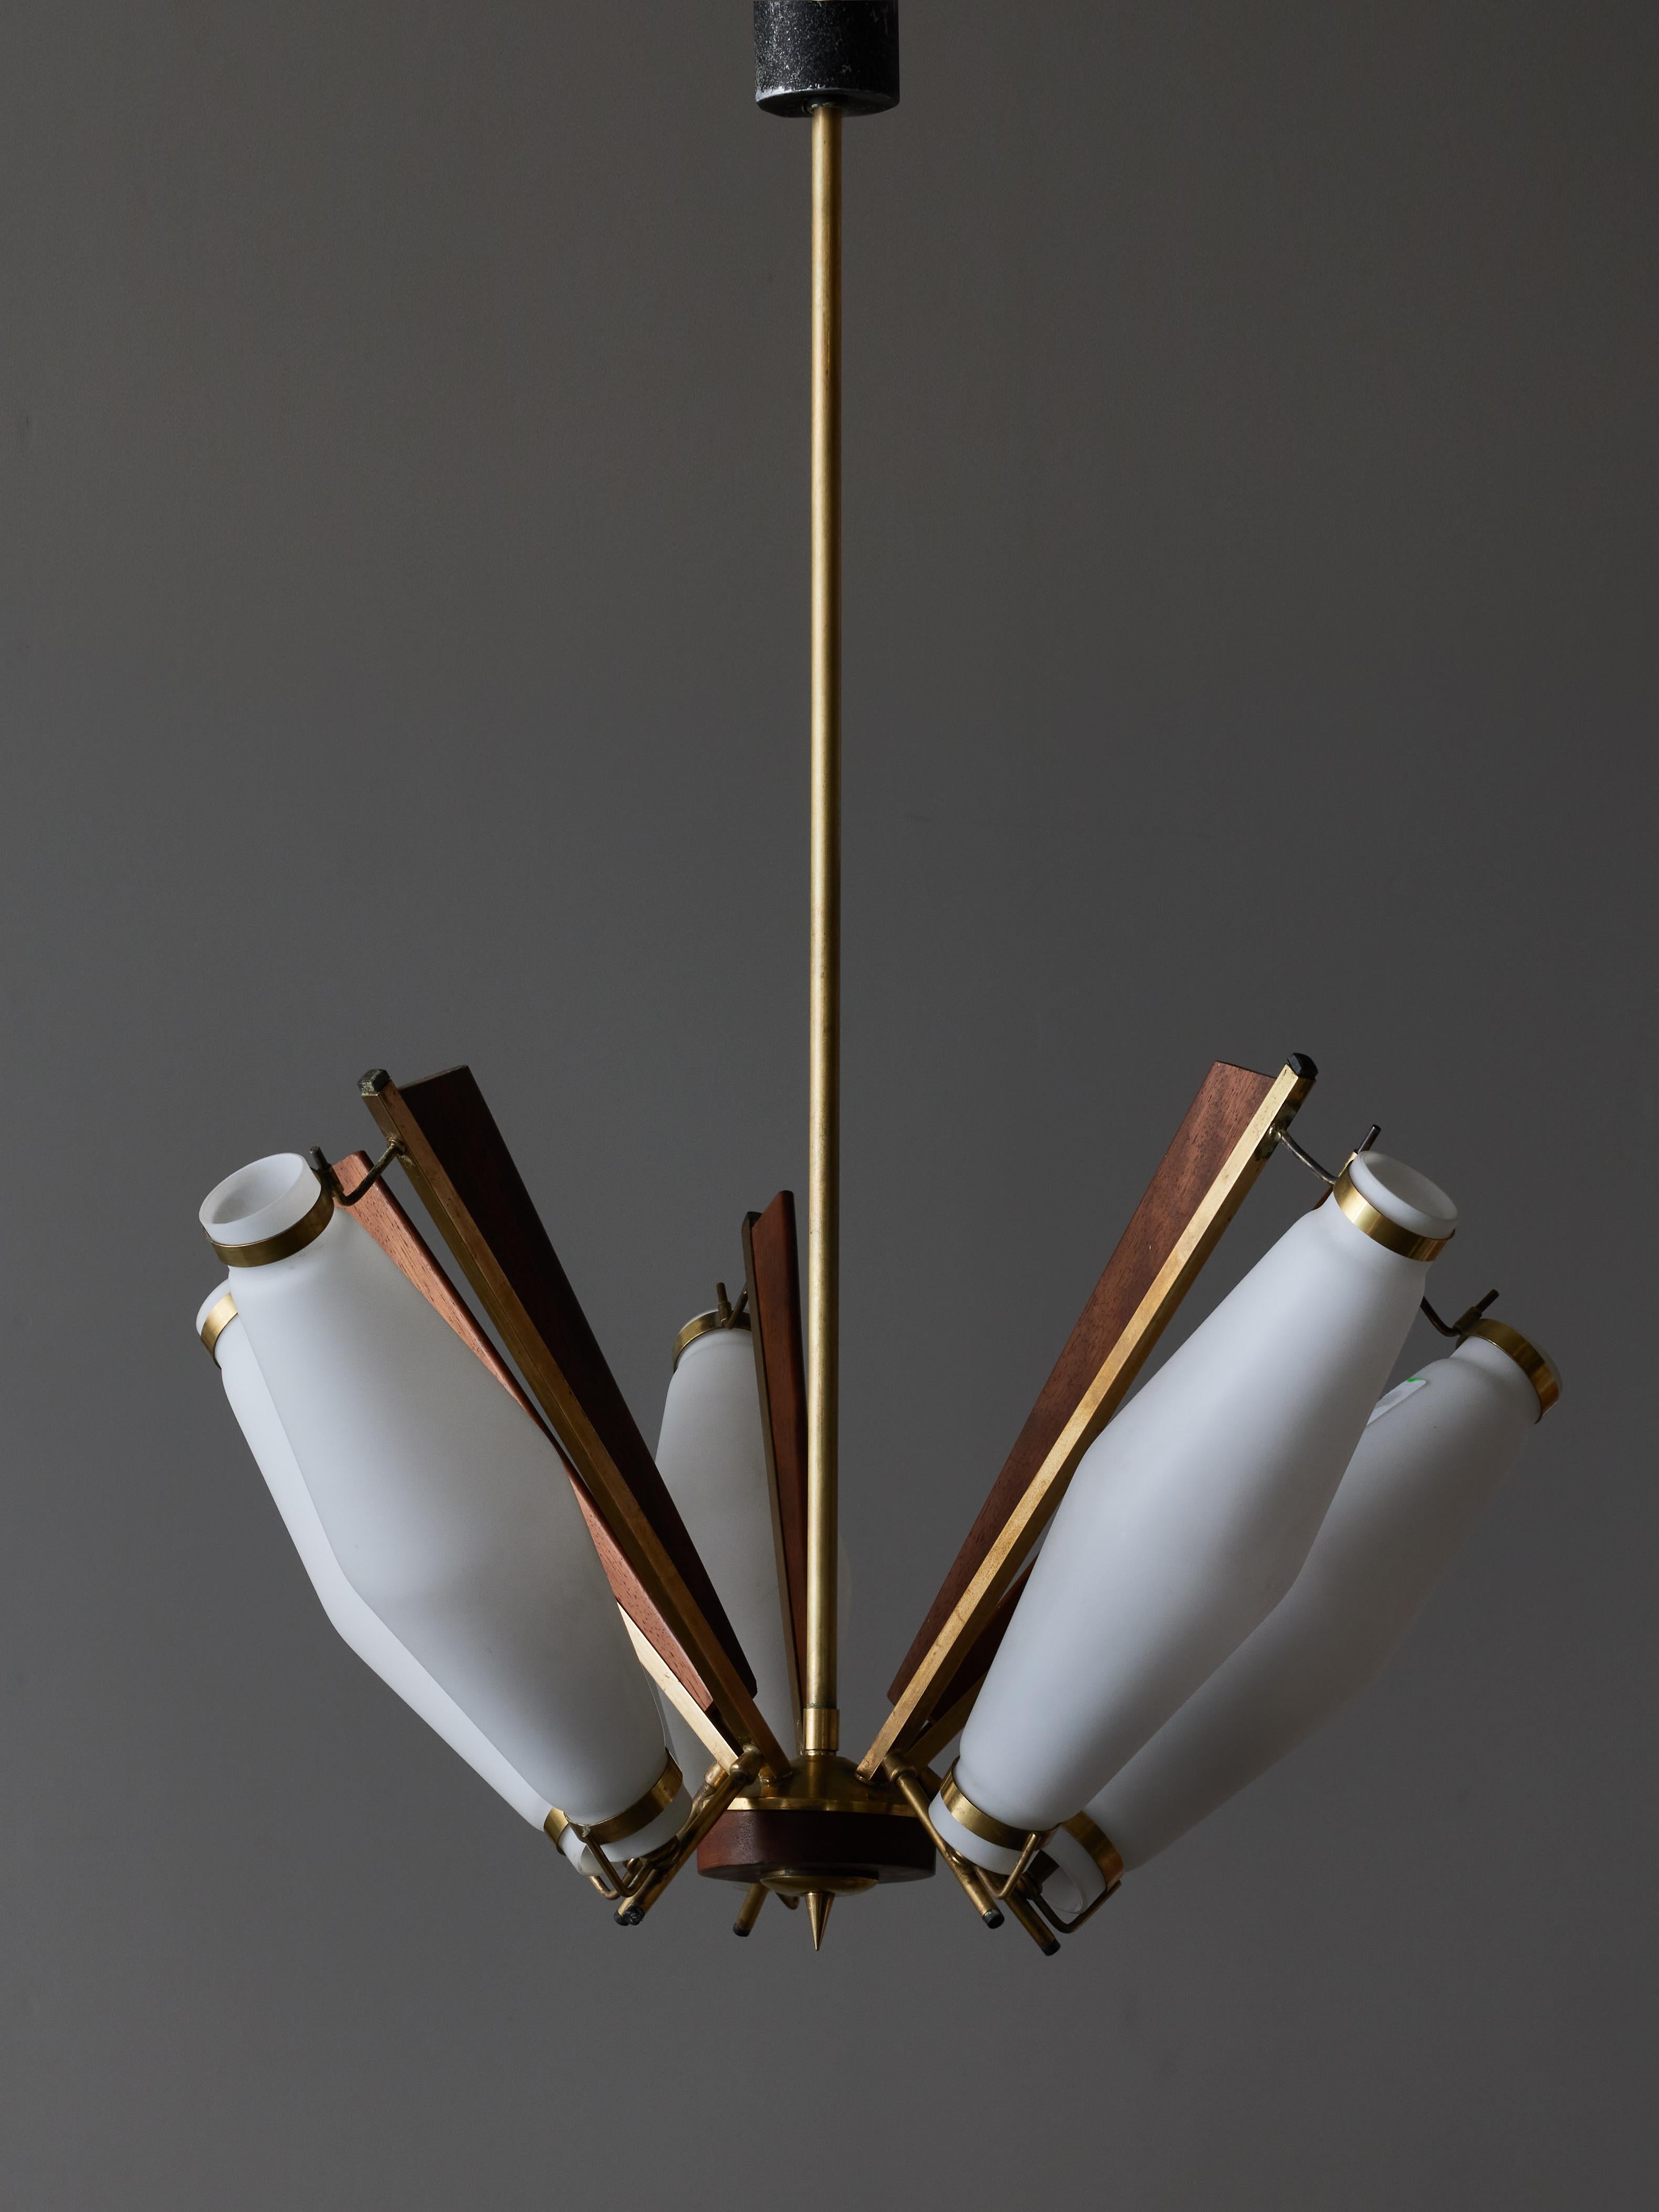 Charming small mid century chandelier made of a brass structure with decorative stained wood panels and five opaline glass shades diffusing the light.

